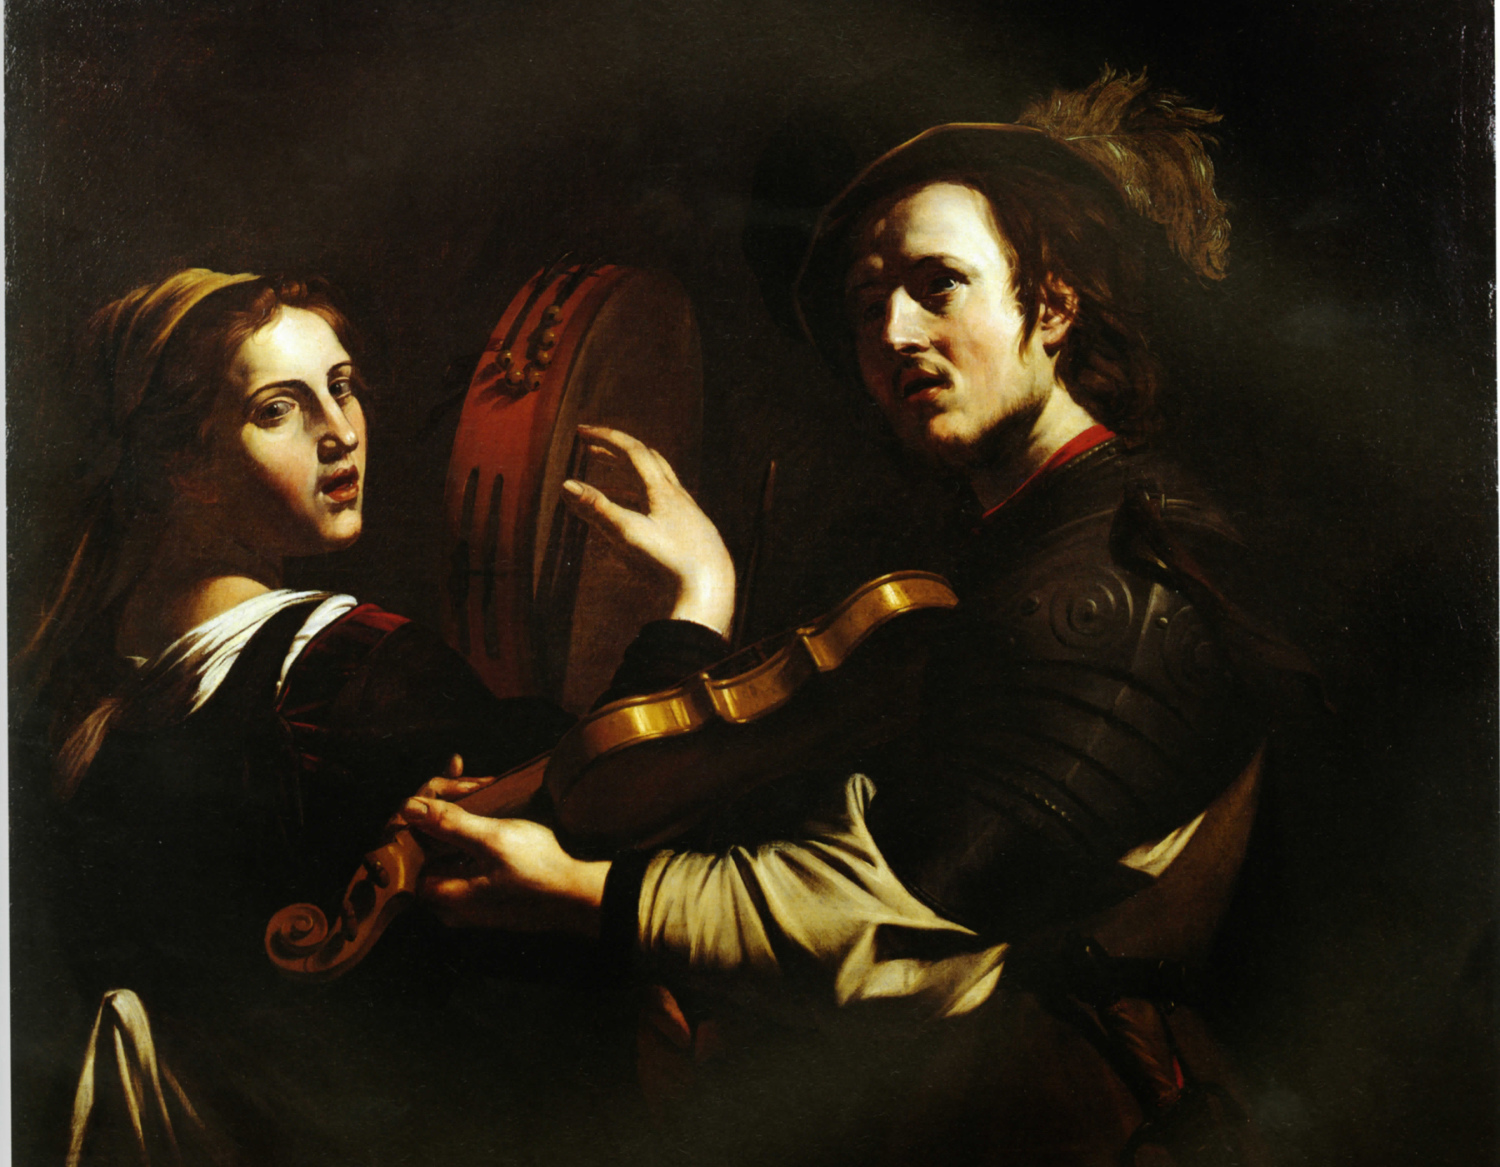 Bartolomeo Manfredi, A Musical Pair, c. 1620. Oil on canvas. Long term loan from Schorr Collection.